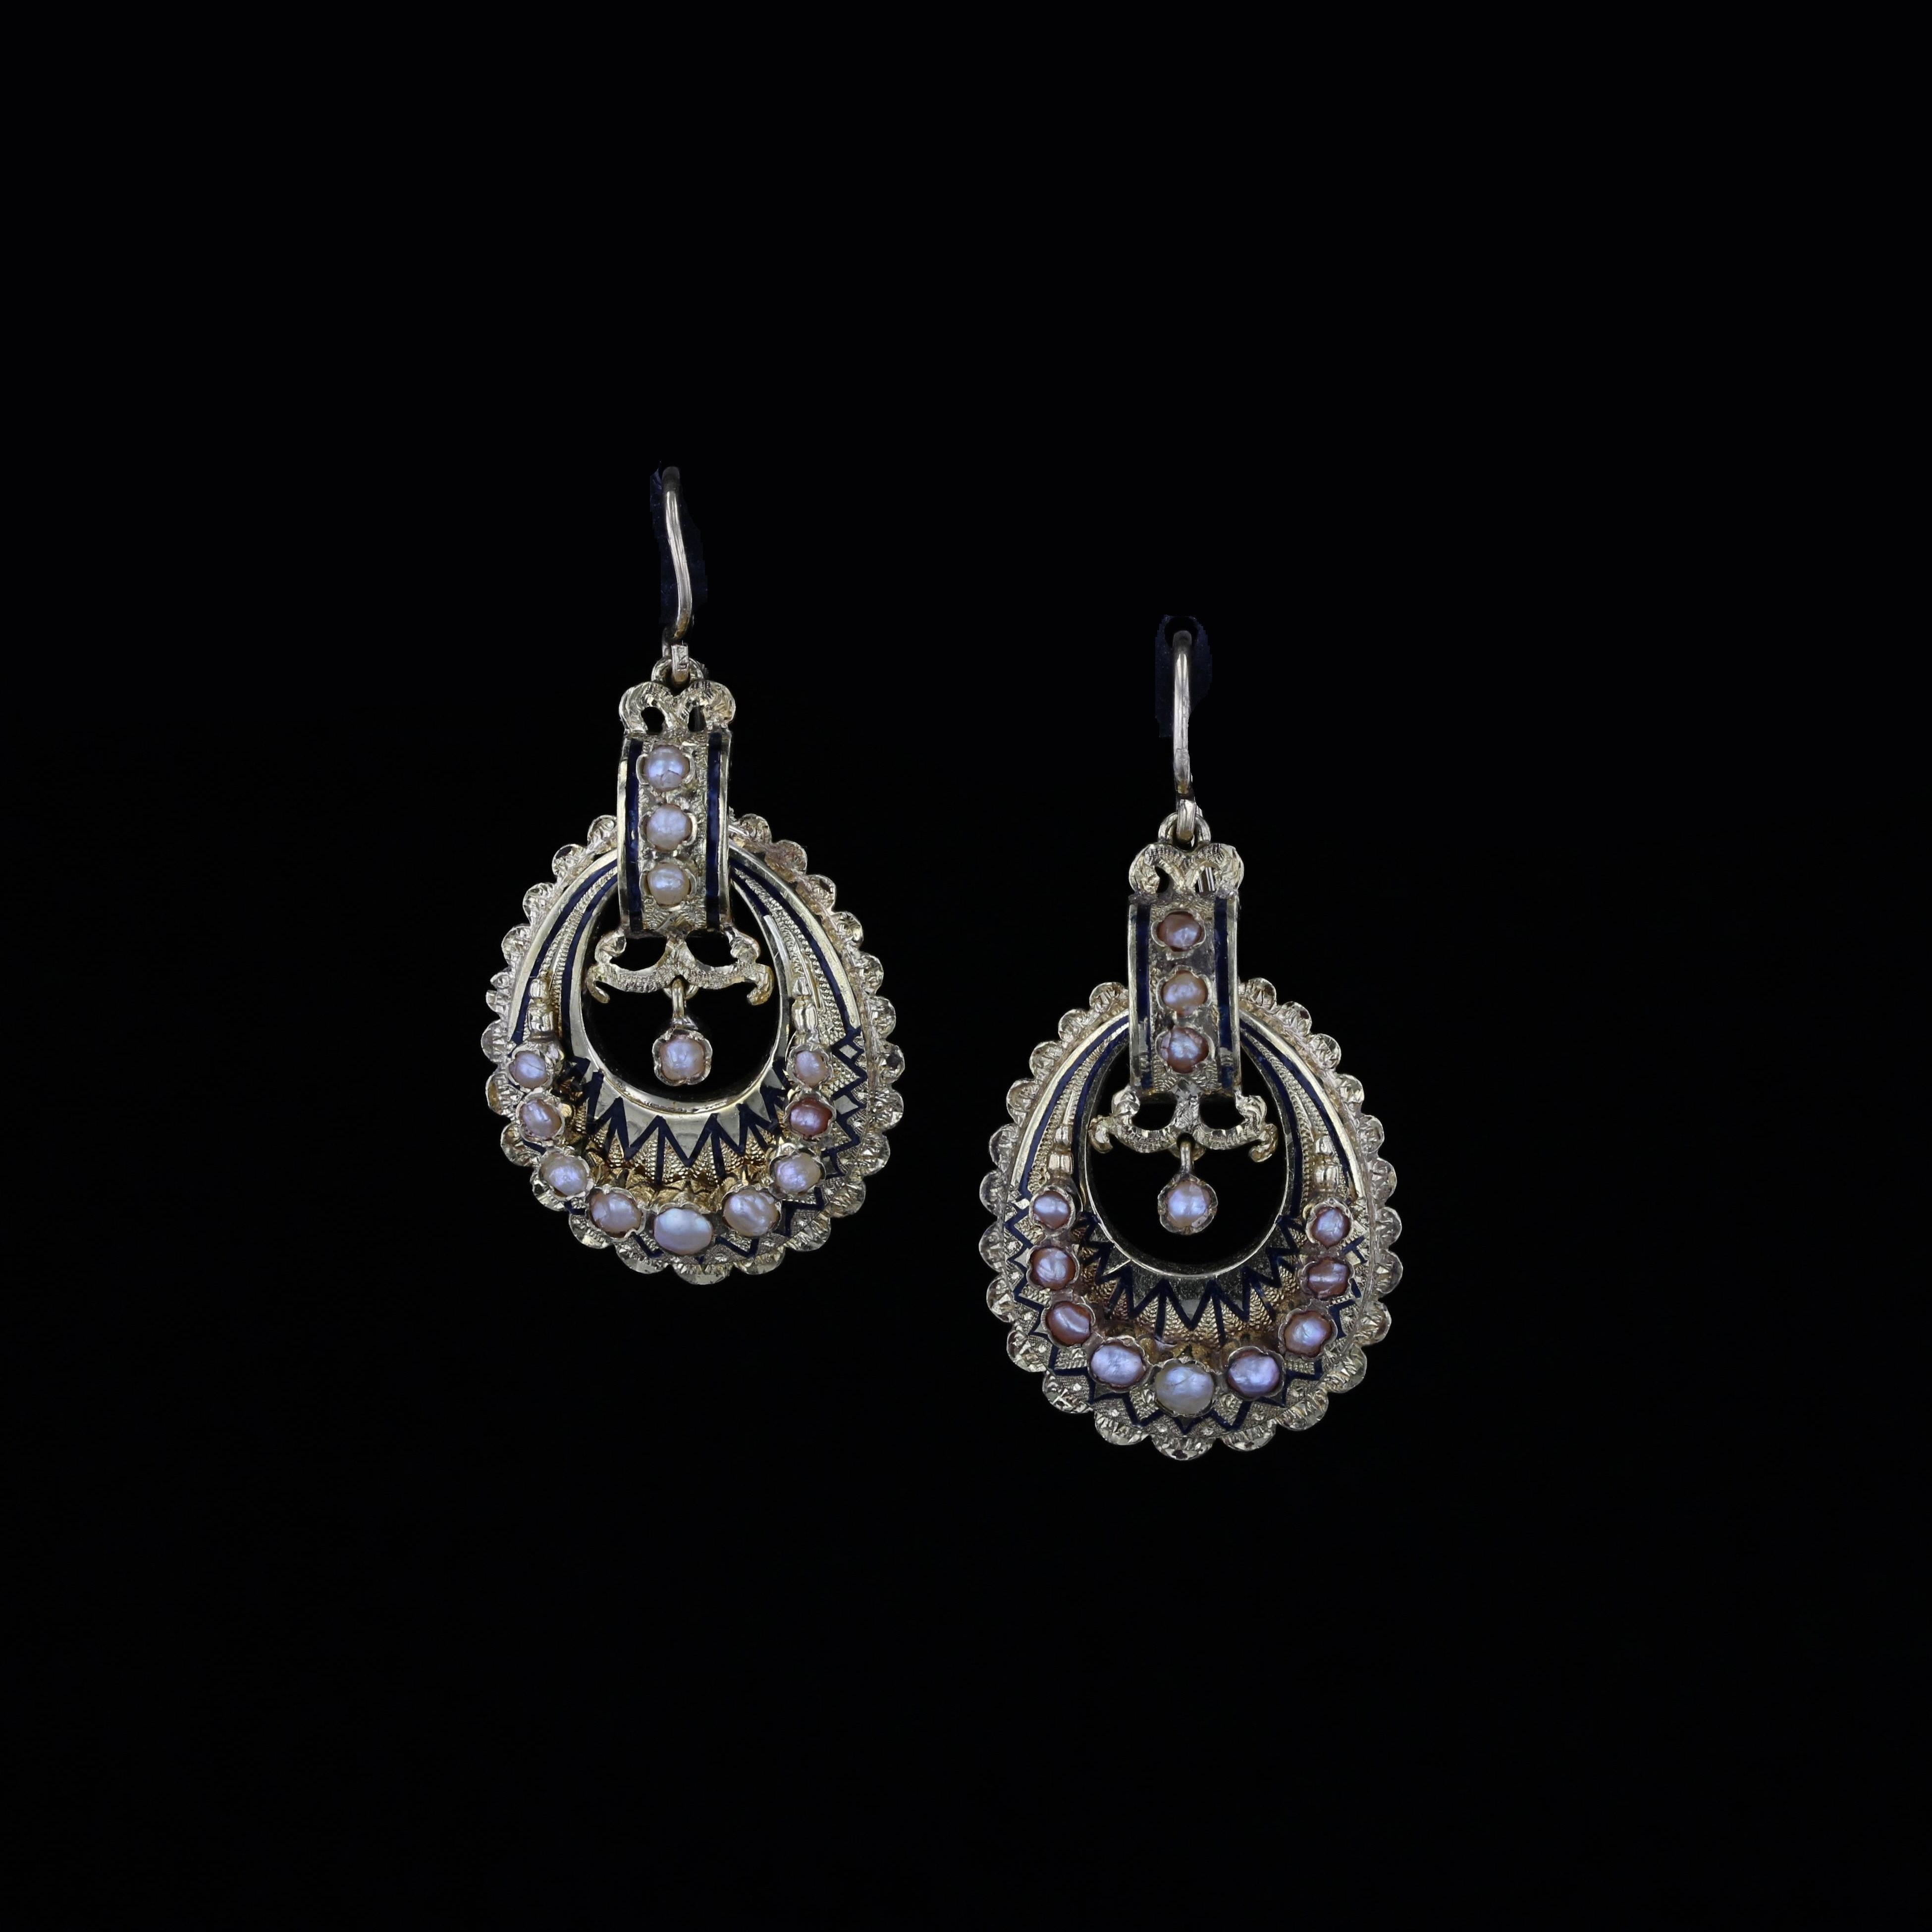 This pair of 15k yellow gold earrings from the Victorian Era - crafted circa 1880 - are a true treasure. Featuring black enamel detailing and creamy pink pearls that come together to create an elegant contrast of funky and sweet.